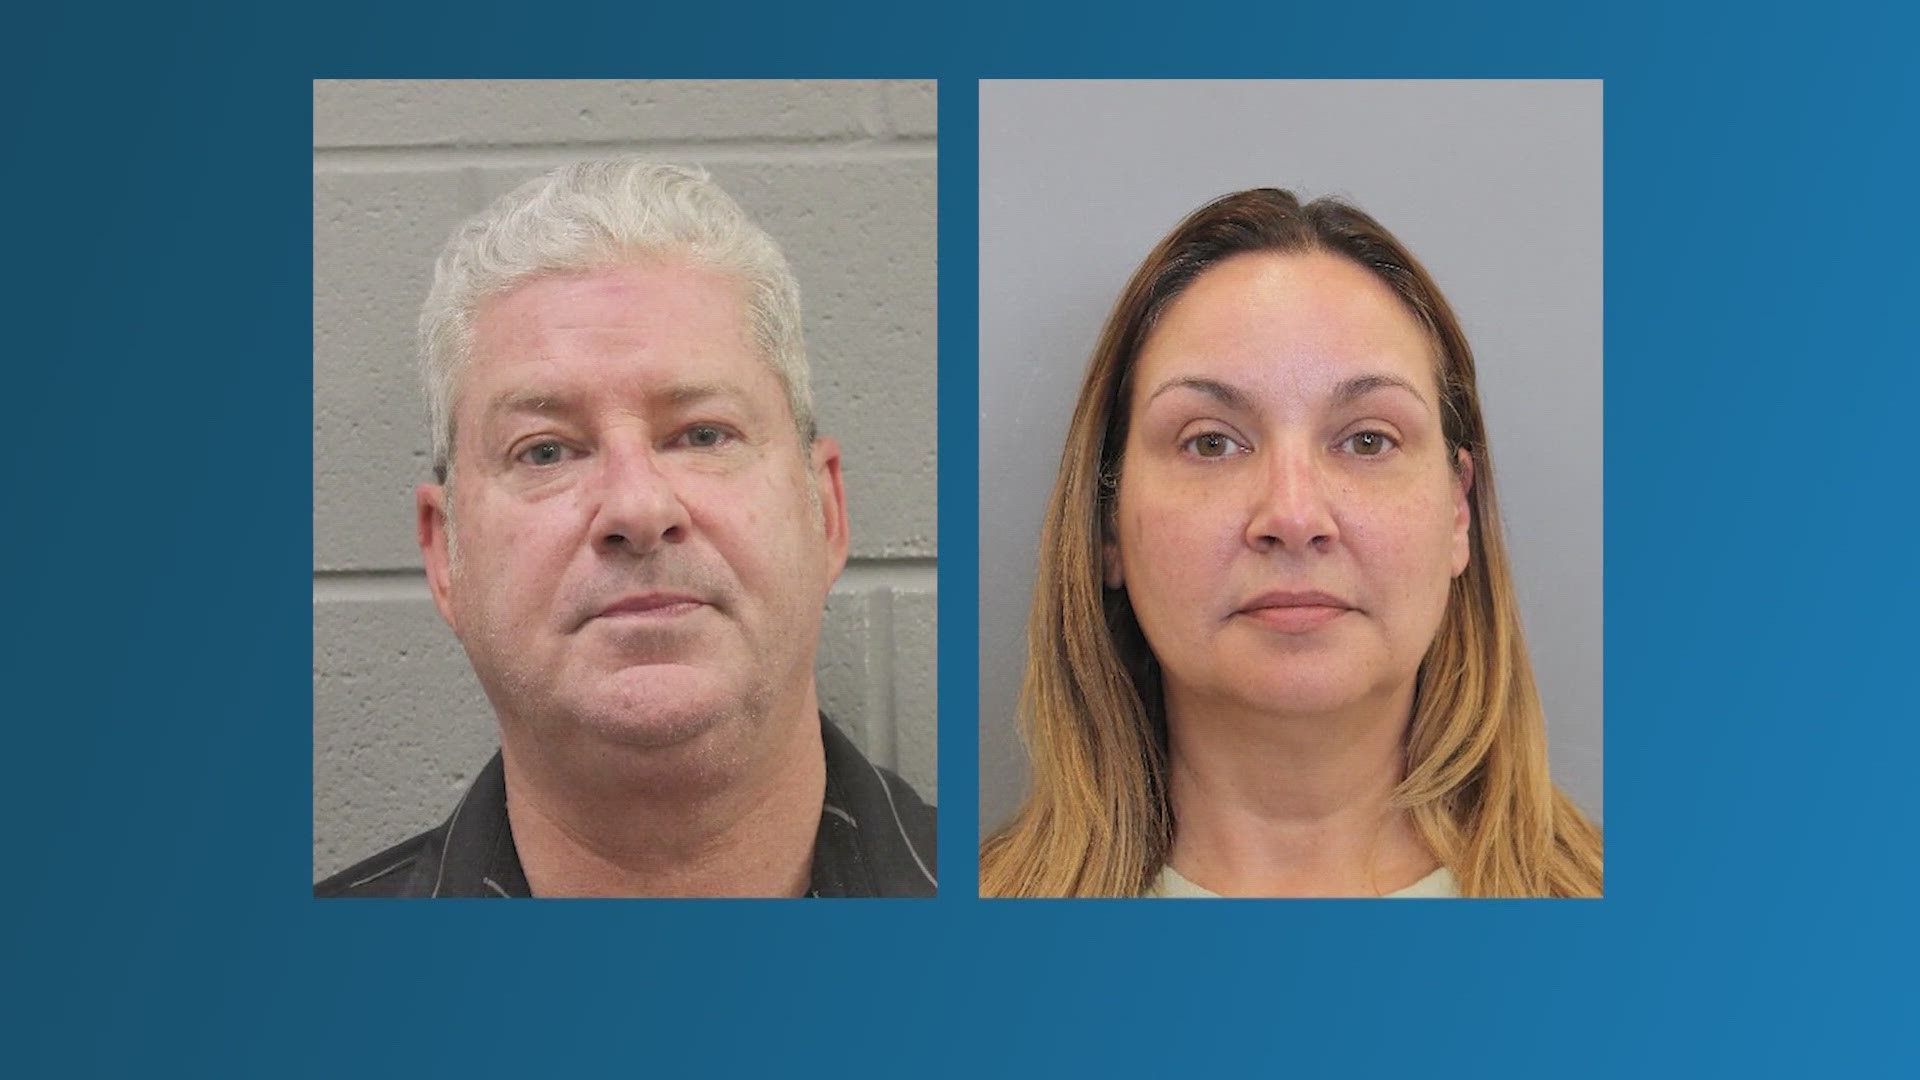 Aleck and Andrea Miller, of Katy, own AM2 Construction and are accused of stealing nearly $200,000 from clients in Katy, Sugar Land, Cypress and Friendswood.